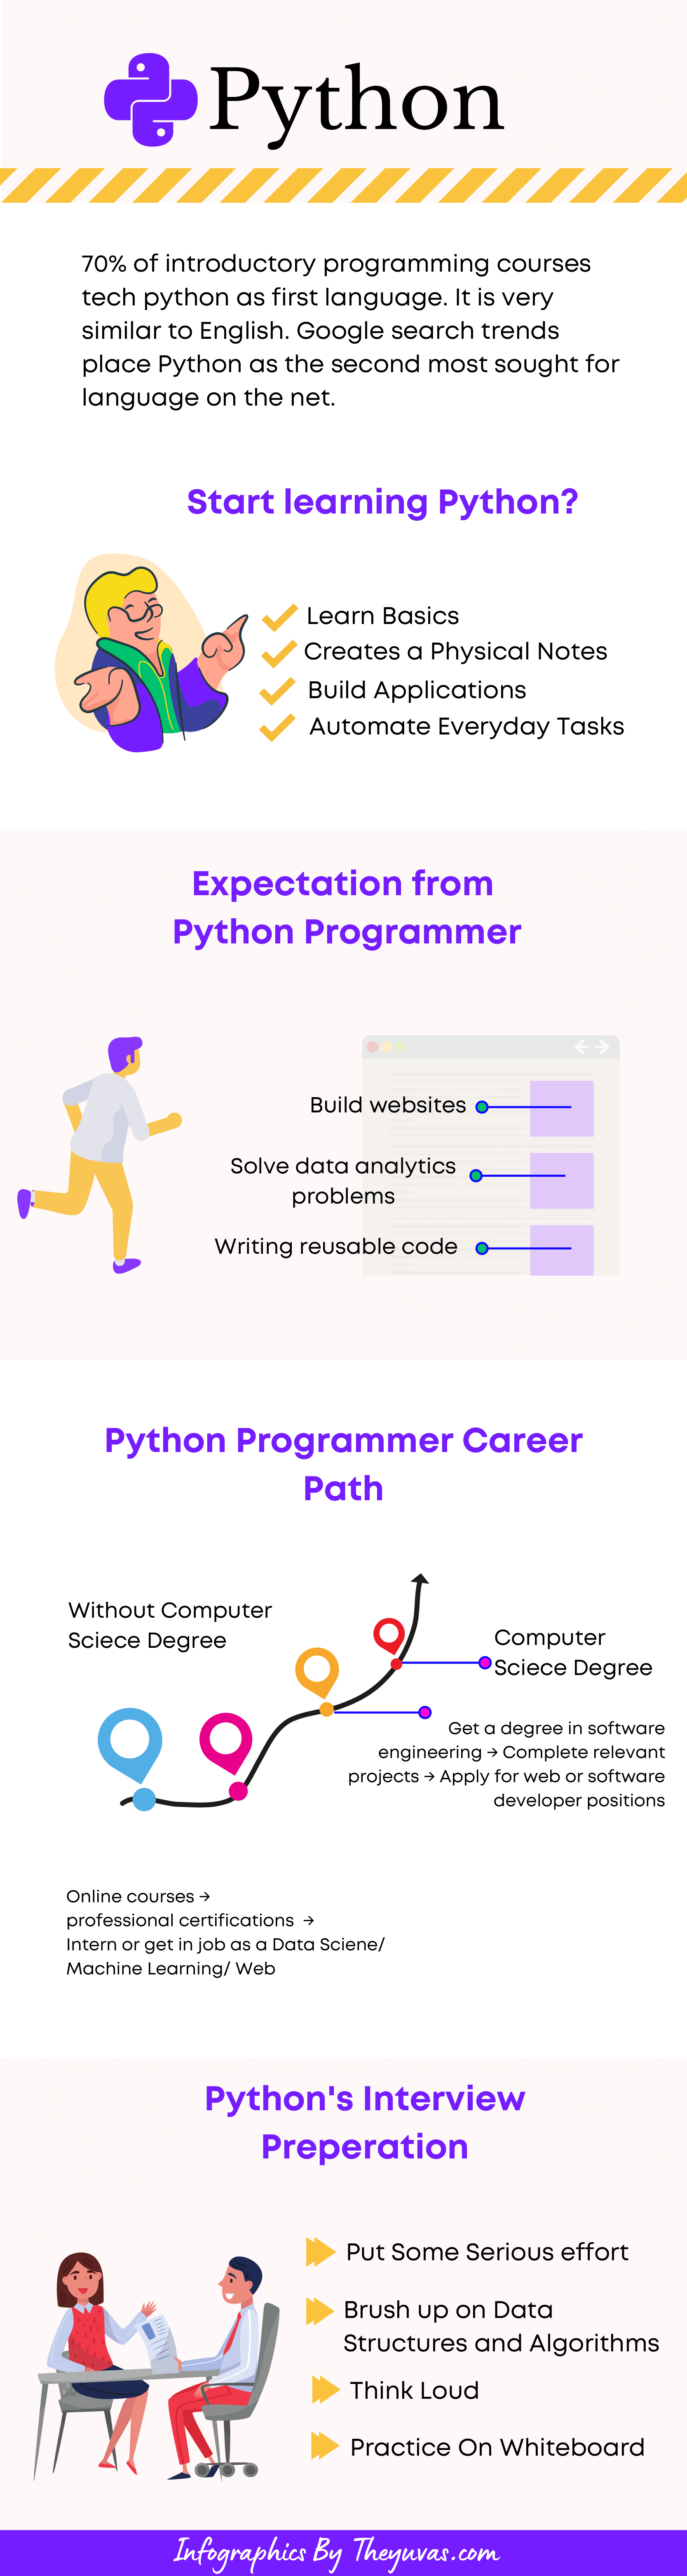 how long does it take to learn python